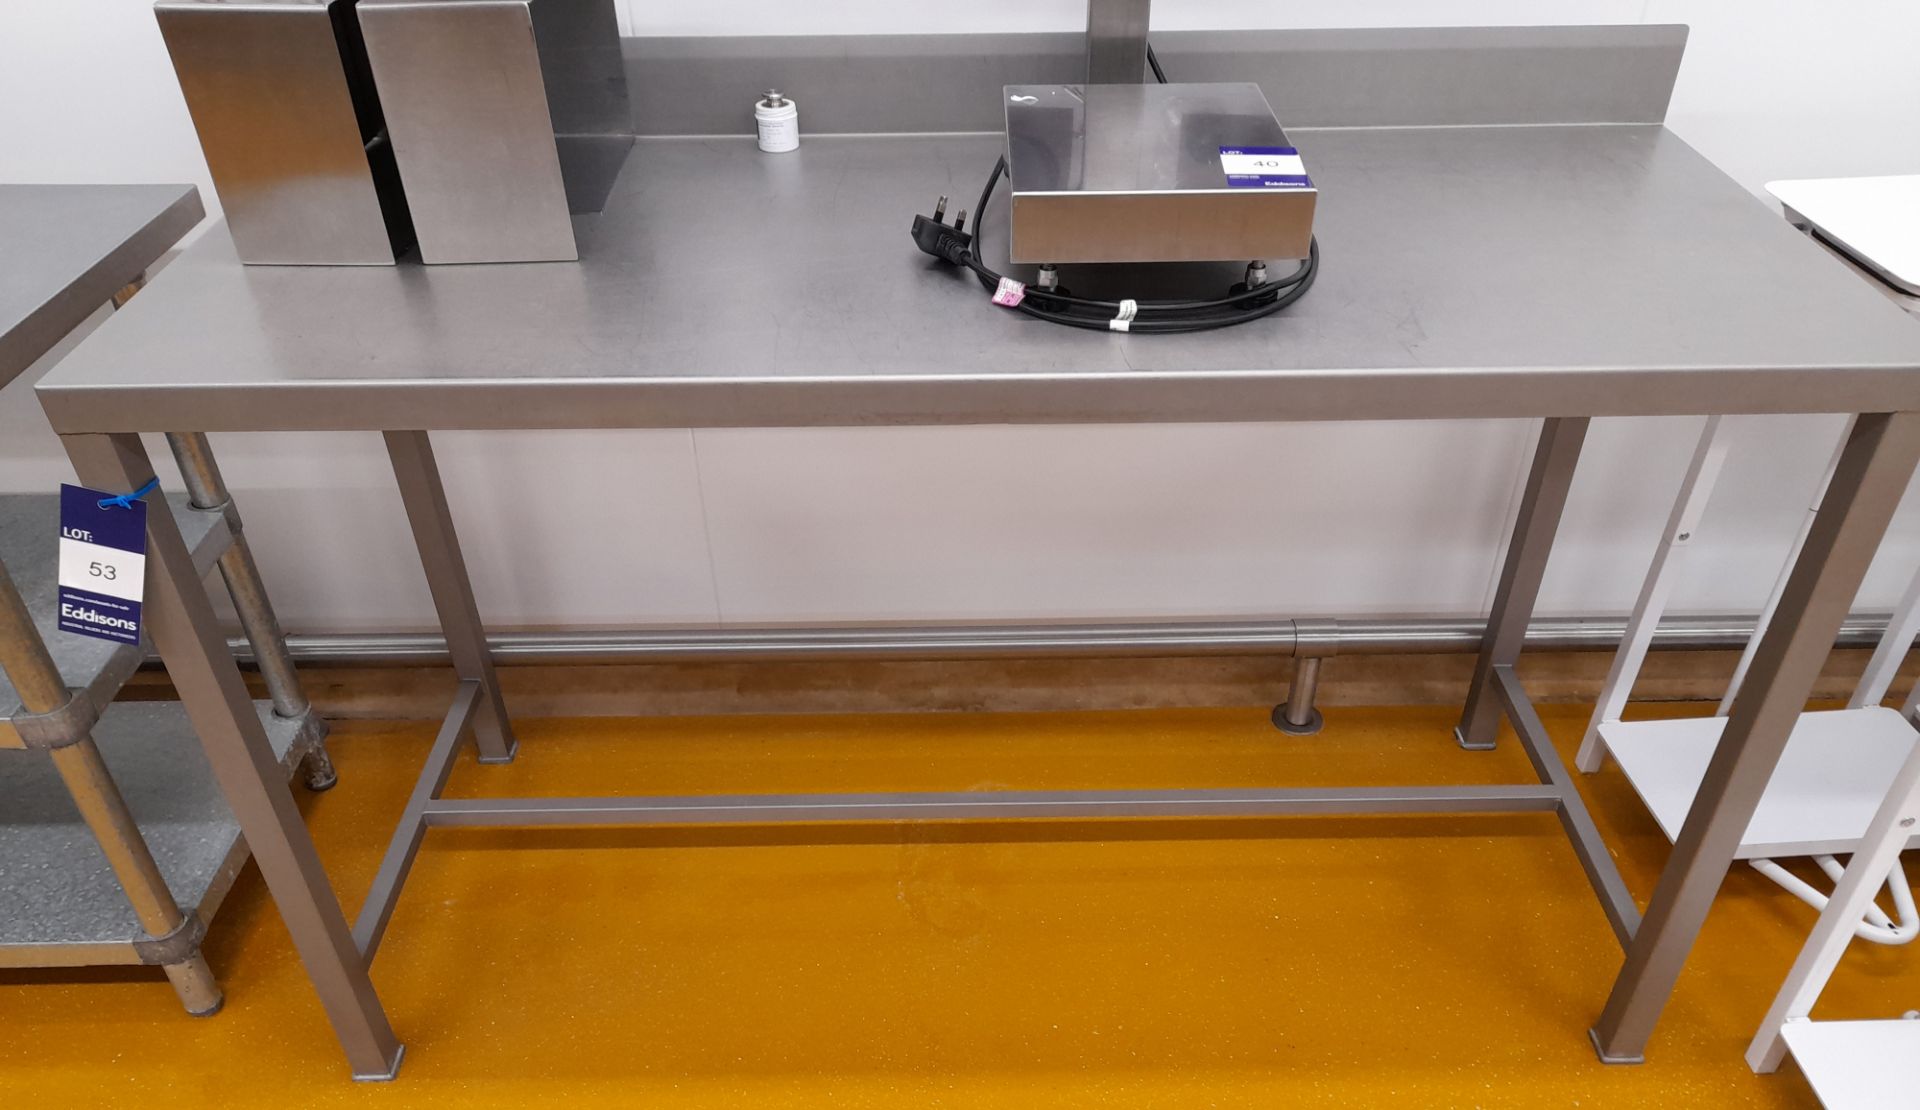 Stainless Steel prep table (1500 x 620)